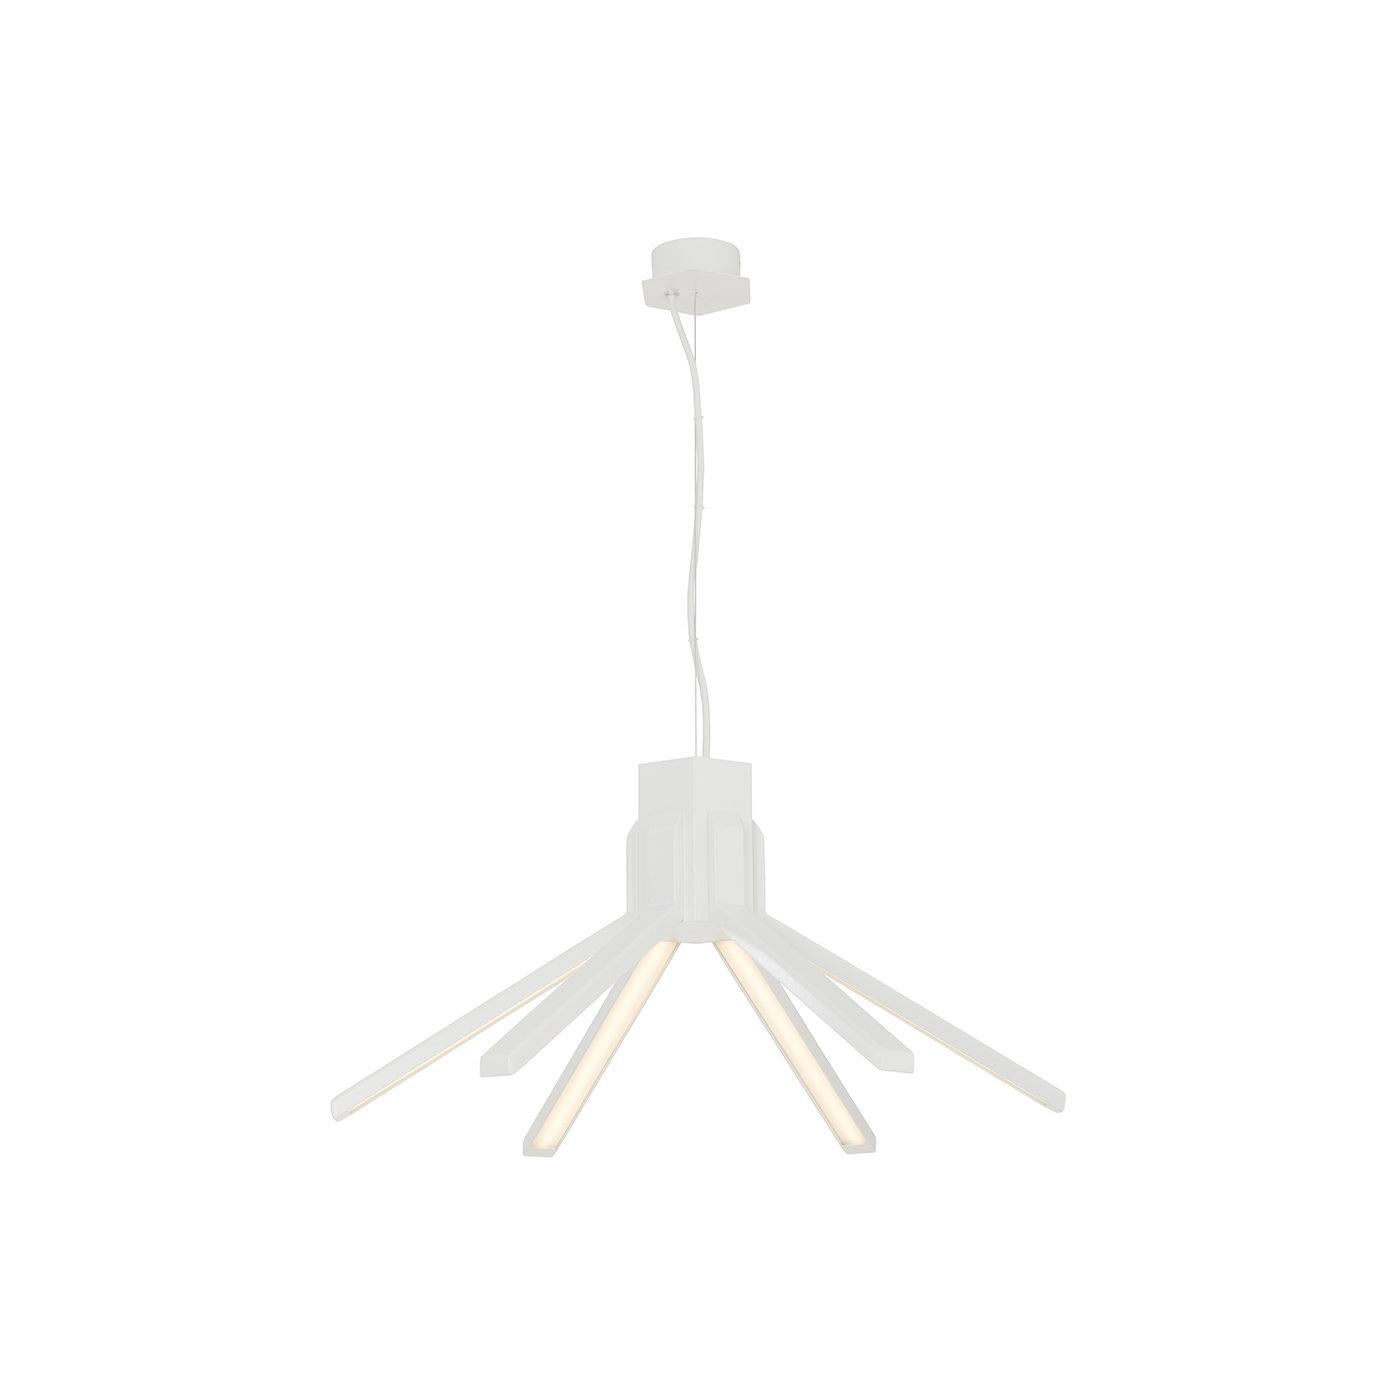 Exuding a refined industrial-chic flair, this gorgeous pendant lamp combines charming matte finishes and clean and sturdy lines. Entirely fashioned of white and natural brass, it features six shades inspired by the image of a 